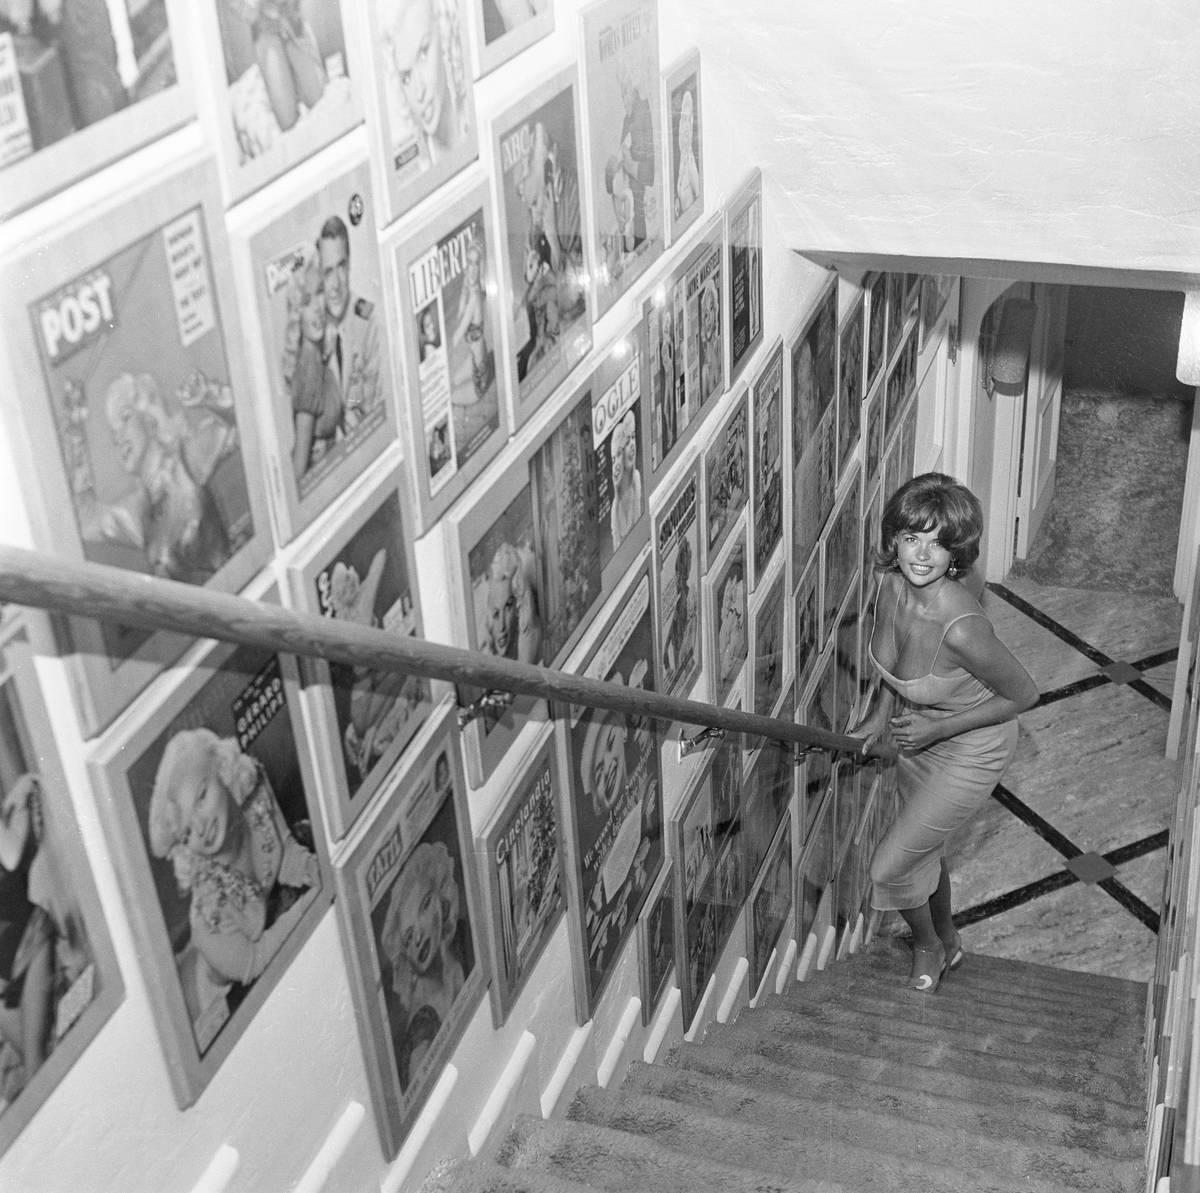 <p>Jayne Mansfield wasn't shy in front of the cameras or about inviting them into her Pink Palace home. This photo, taken in the 1950s, shows the pin-up girl on the staircase in her home.</p> <p>It shows that she wasn't above being a bit pretentious, as the wall leading up the stairs is covered in her photo, gracing various magazine covers!</p>